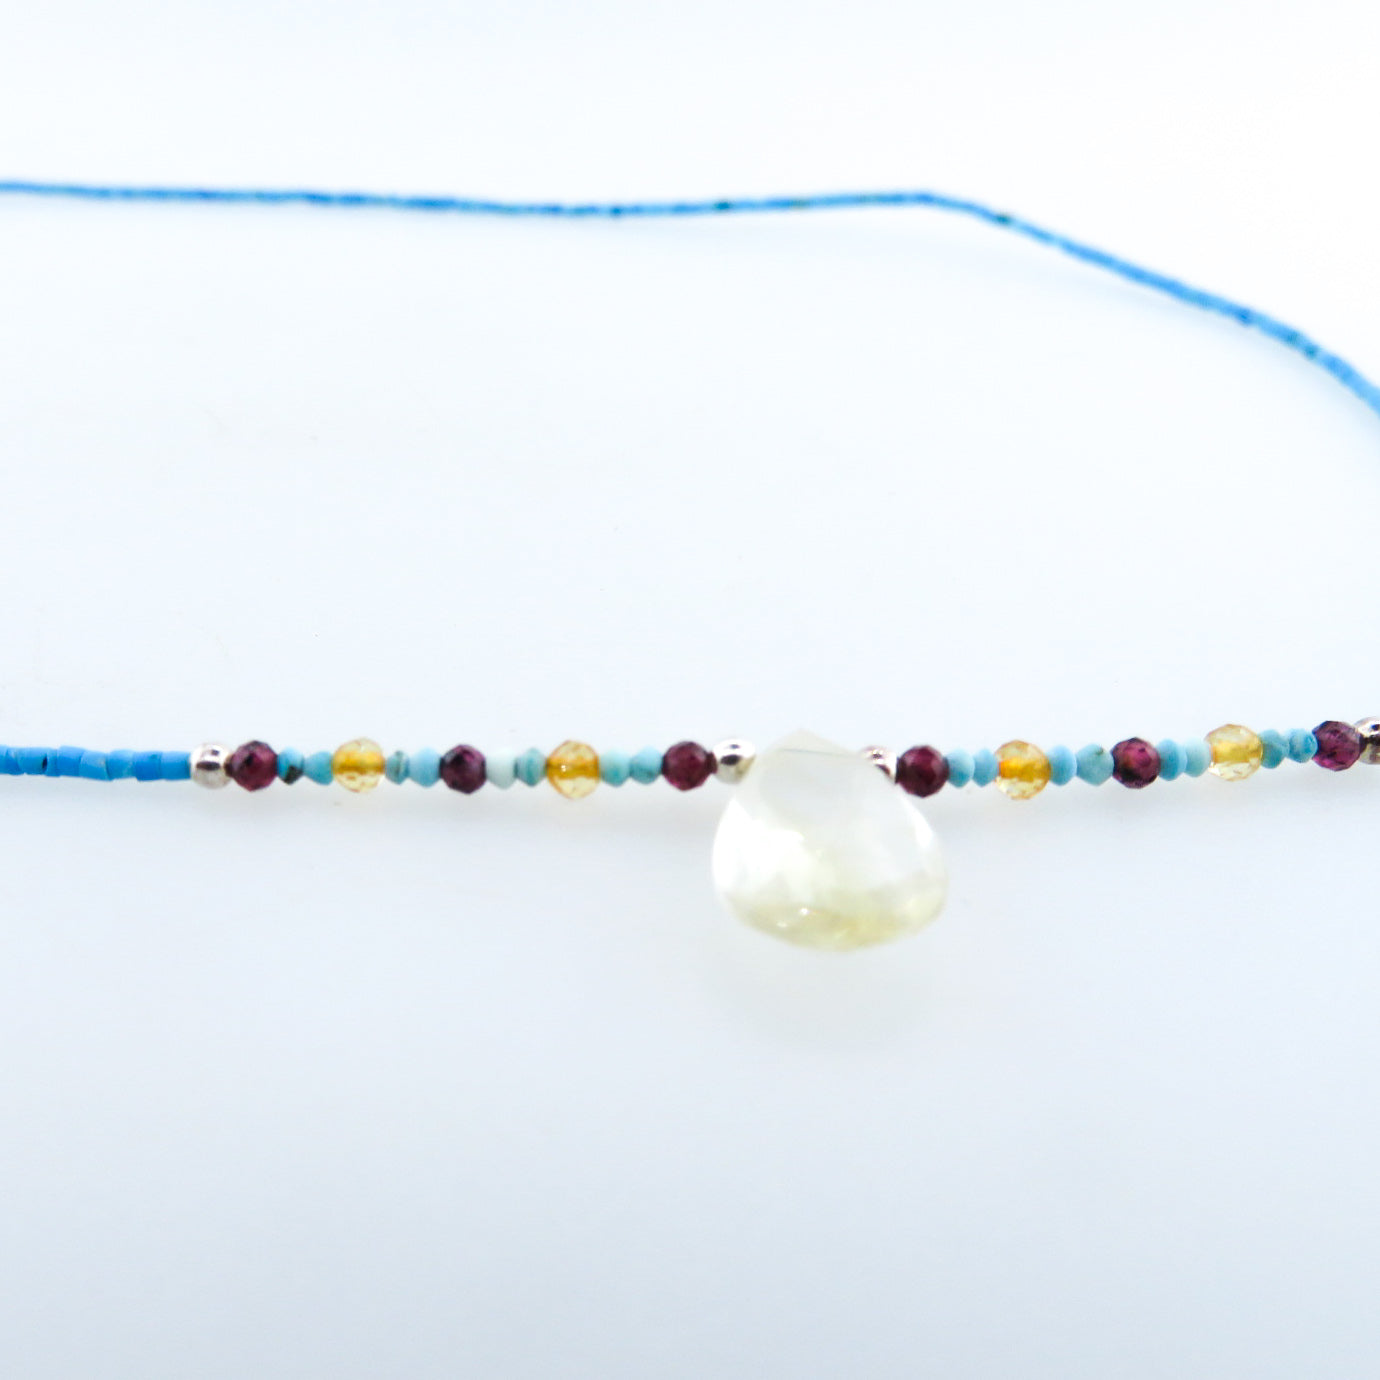 Turquoise Necklace with Citrine, Garnet, Carnelian and Silver Beads